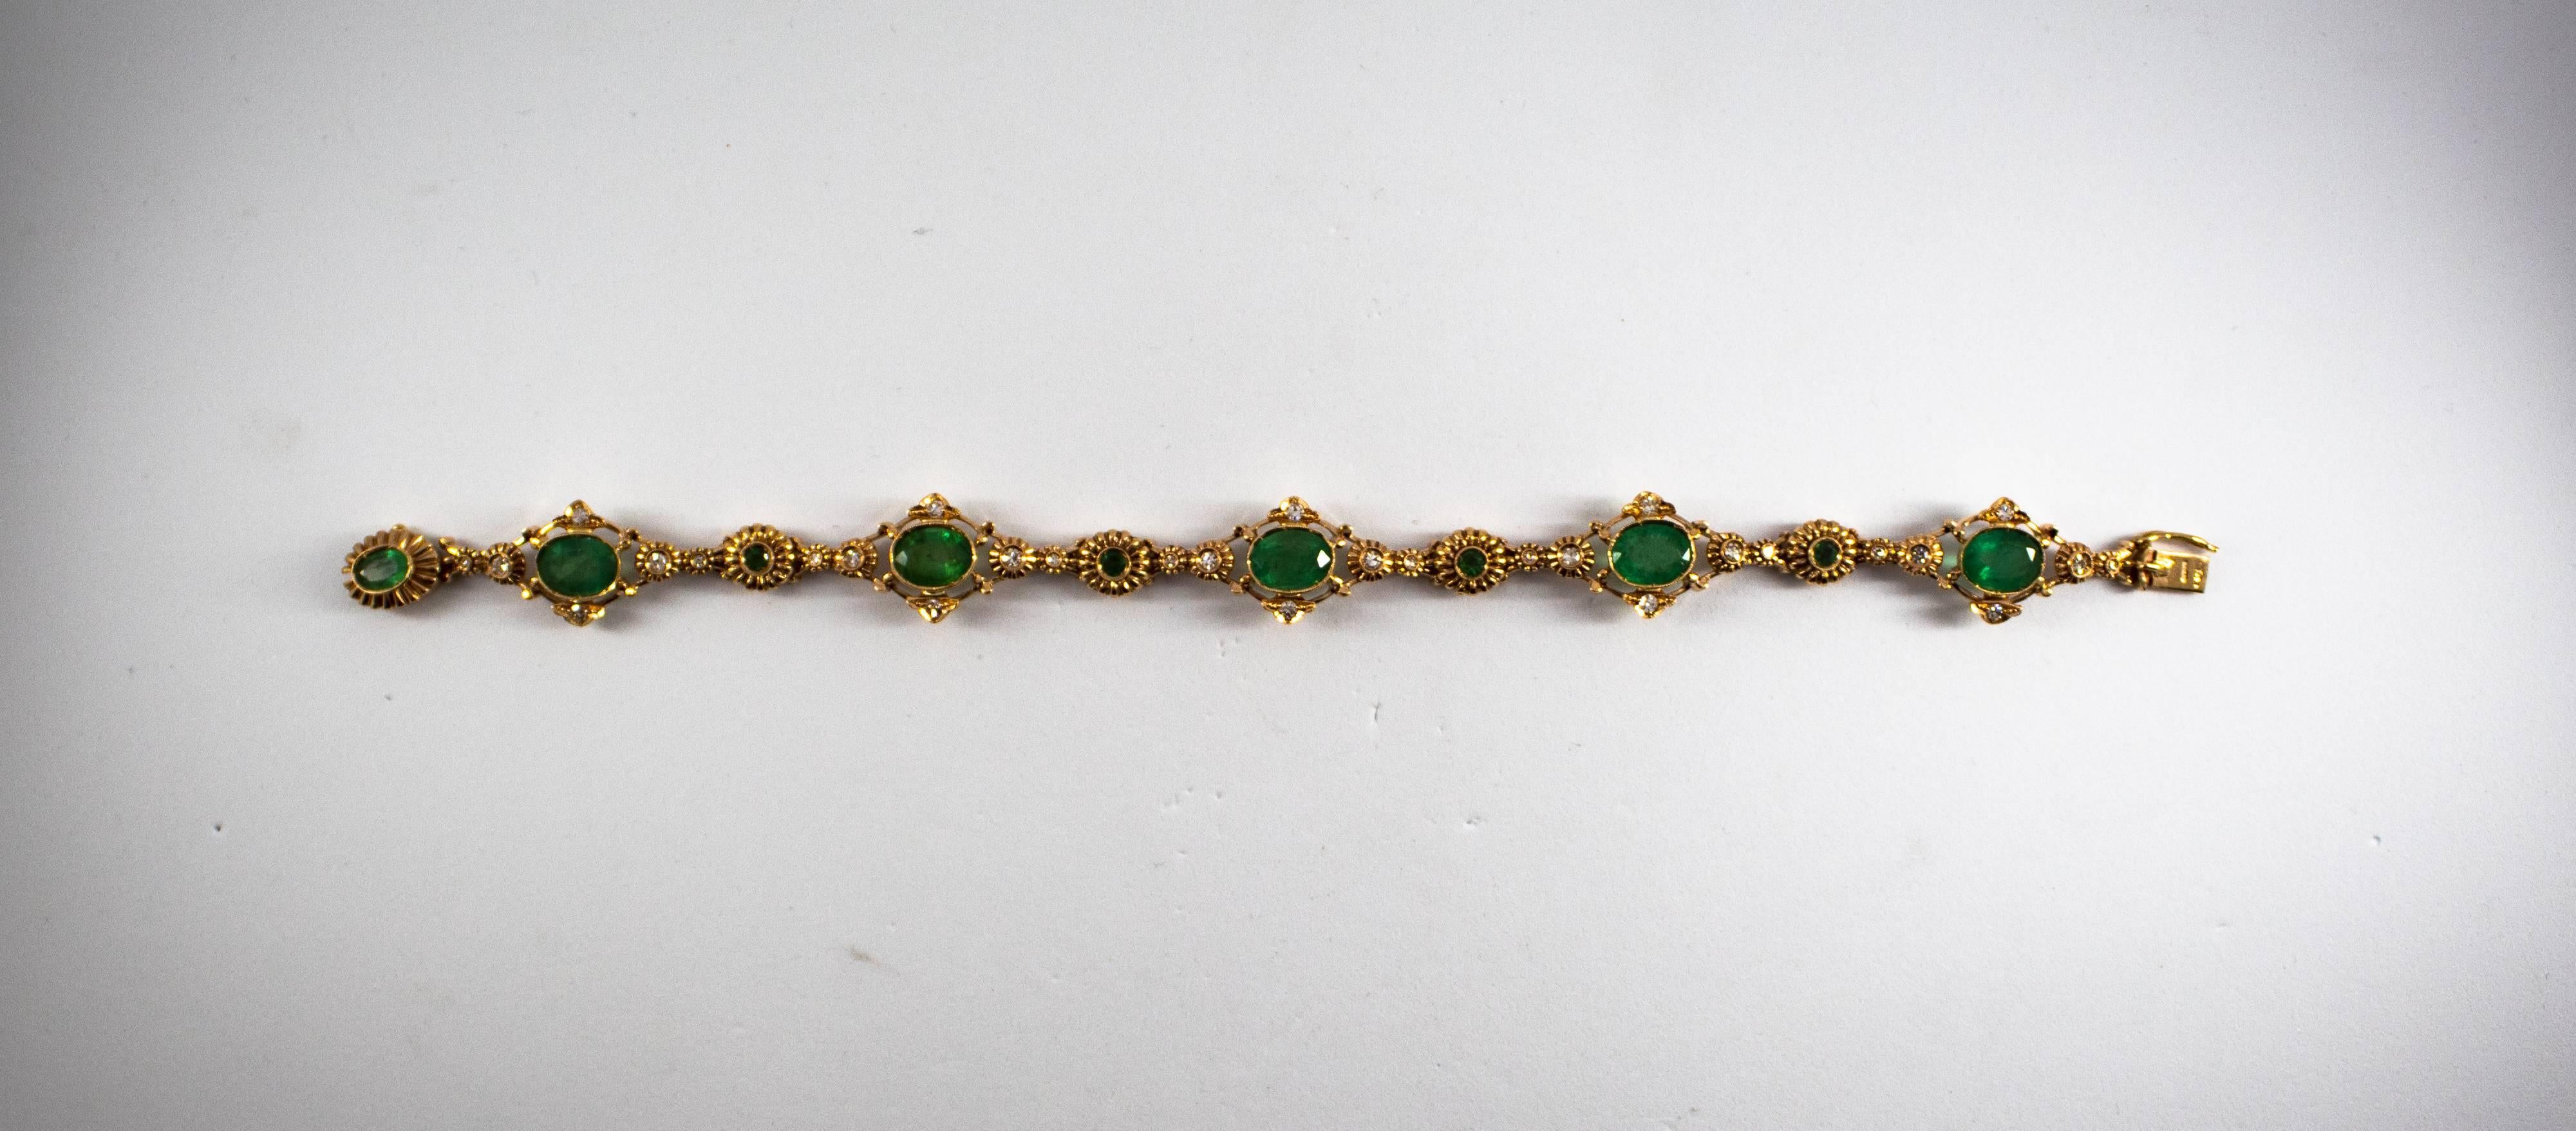 This bracelet is made of 14K Yellow Gold.
This bracelet has 0.50 Carats of White Diamonds.
This bracelet has 6.40 Carats of Emeralds.
We're a workshop so every piece is handmade, customizable and resizable.